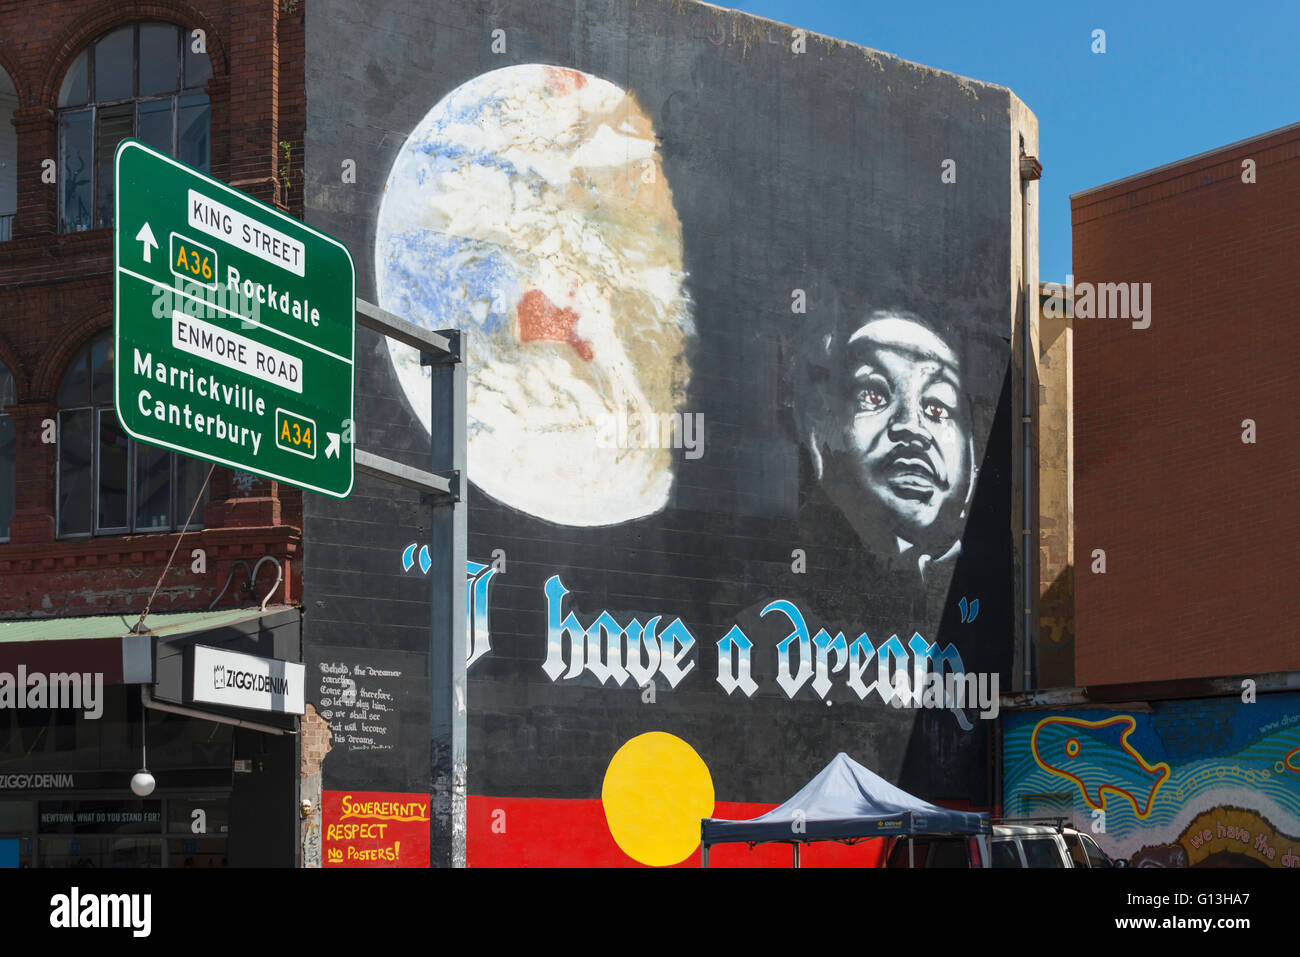 Martin Luther King "I had a dream' wall mural, rue King, Newtown, Sydney, New South Wales, Australia Banque D'Images